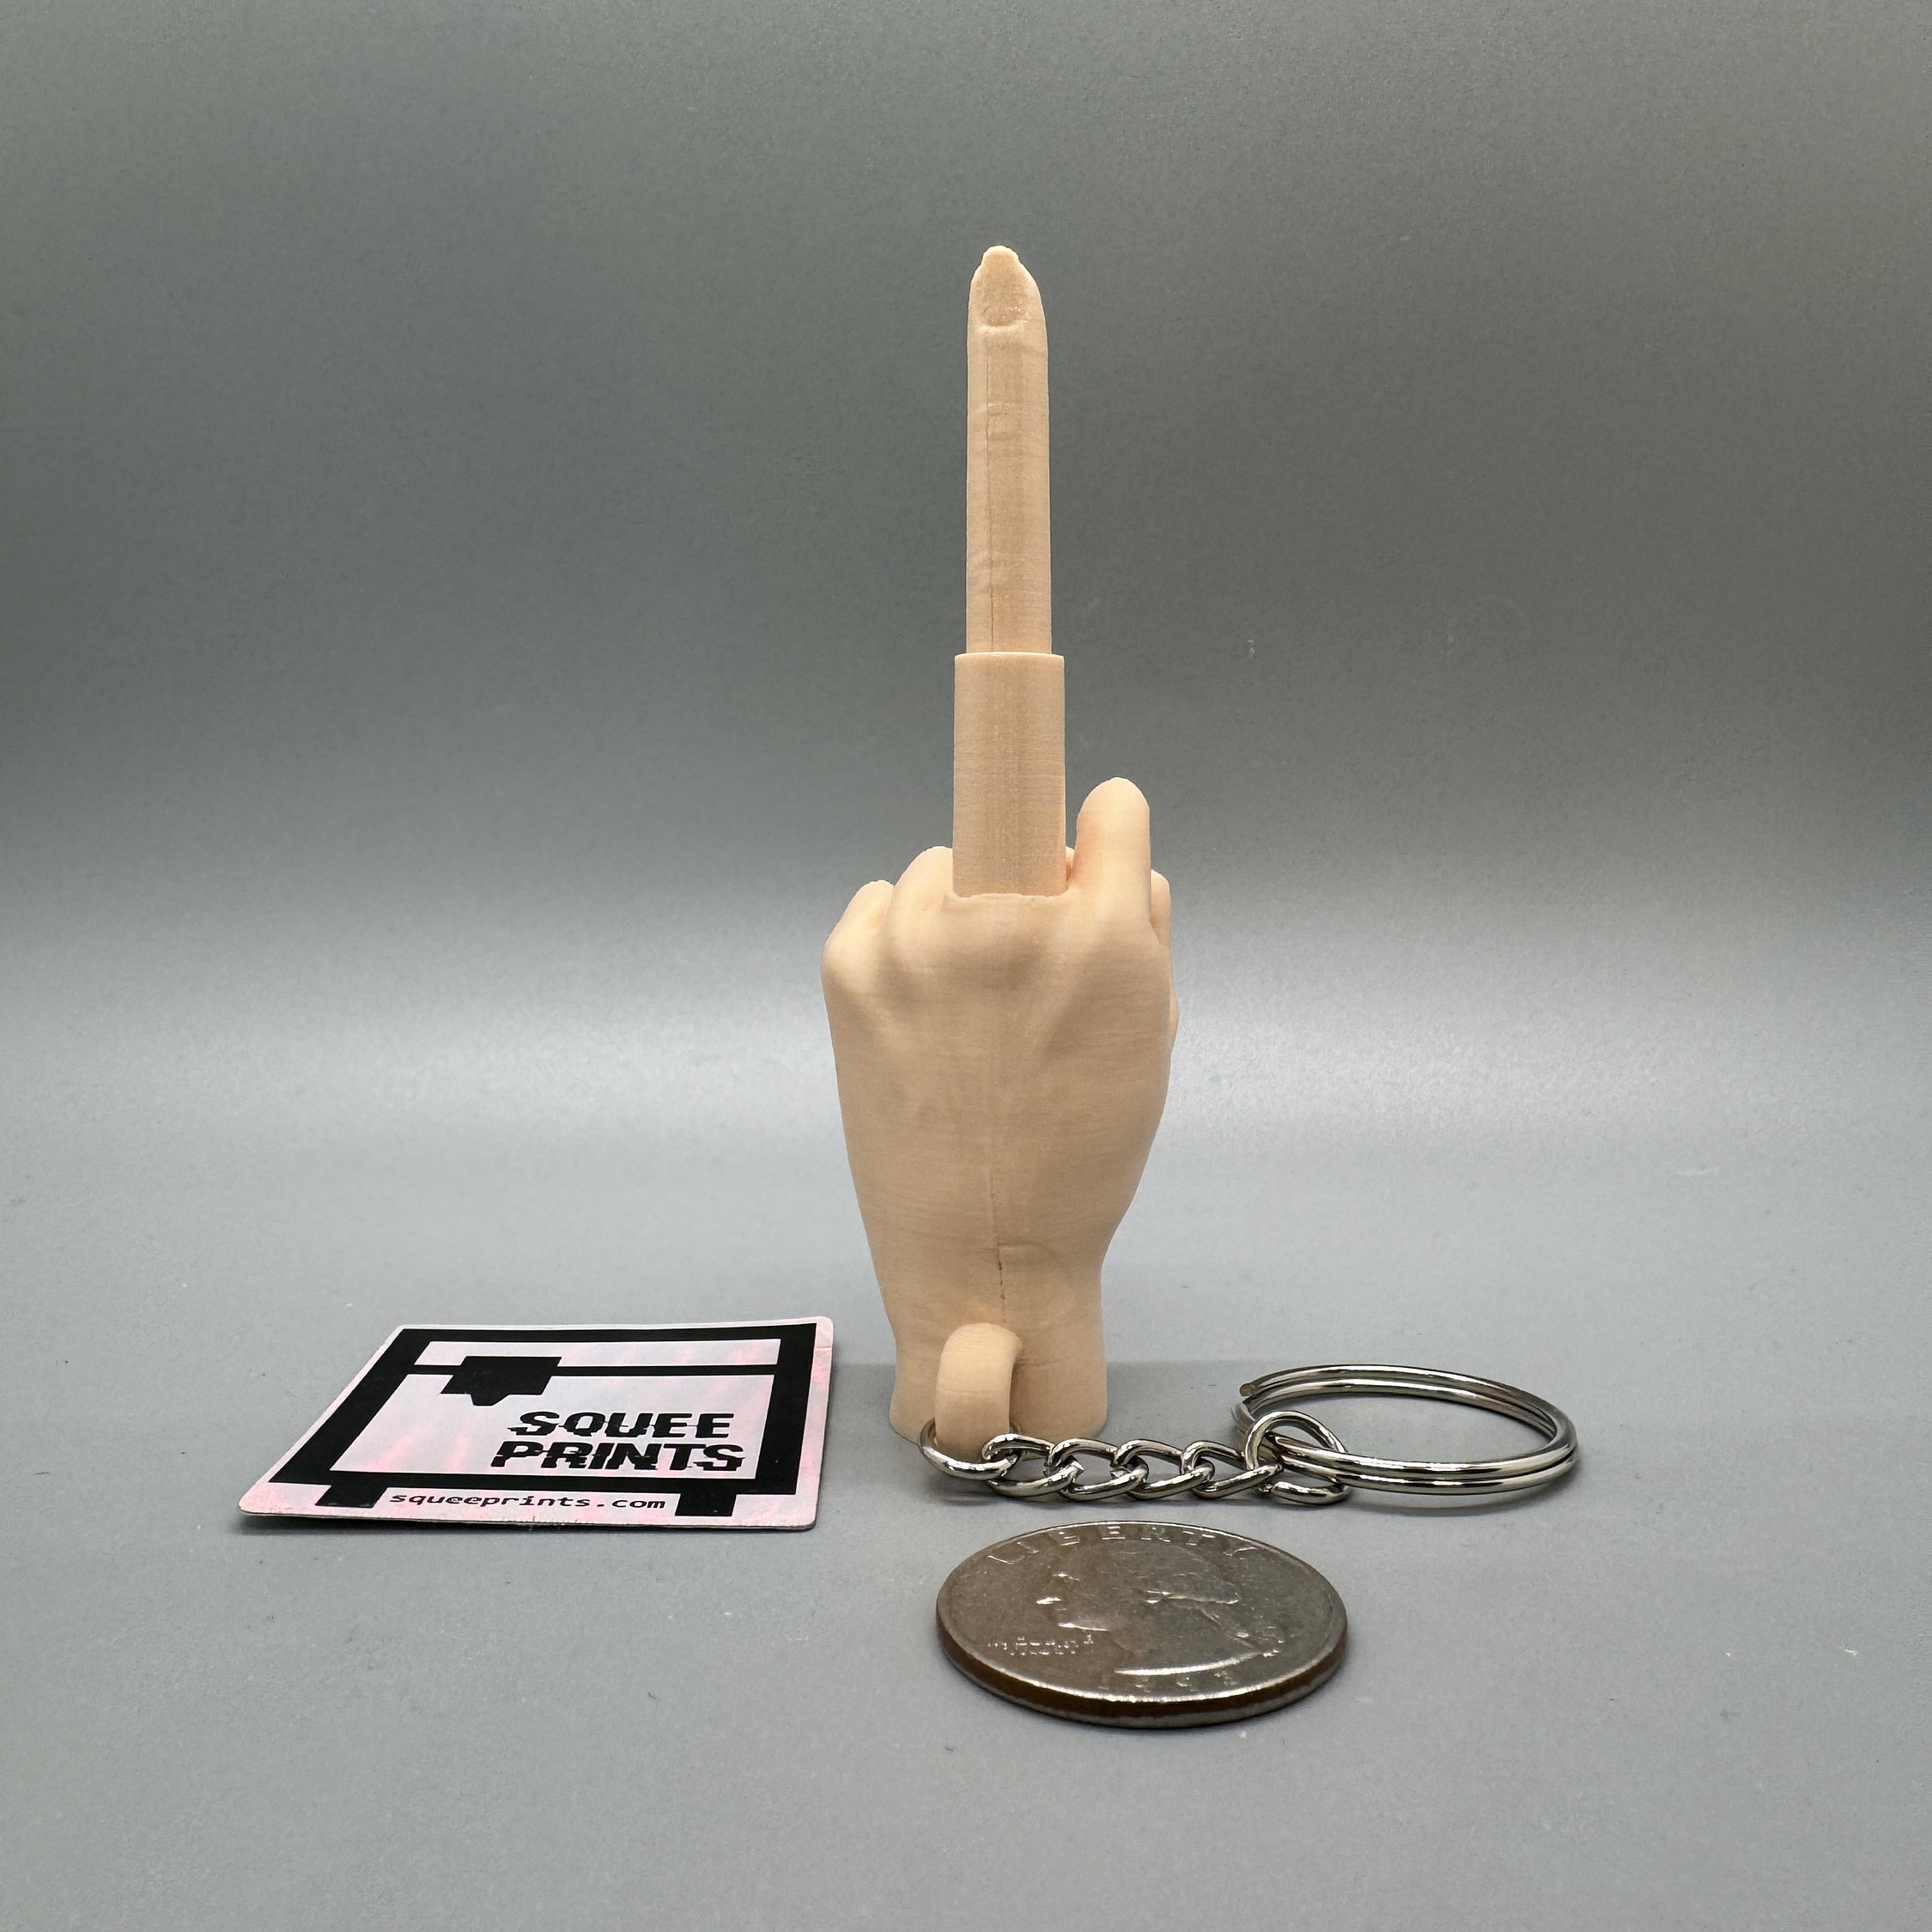 KCRPM 3D Printed Folding Middle Finger, 3D Printed Collapsing Middle Finger  Gifts, Retractable Funny Gag Gift, Distinctive Style Middle Finger Statue